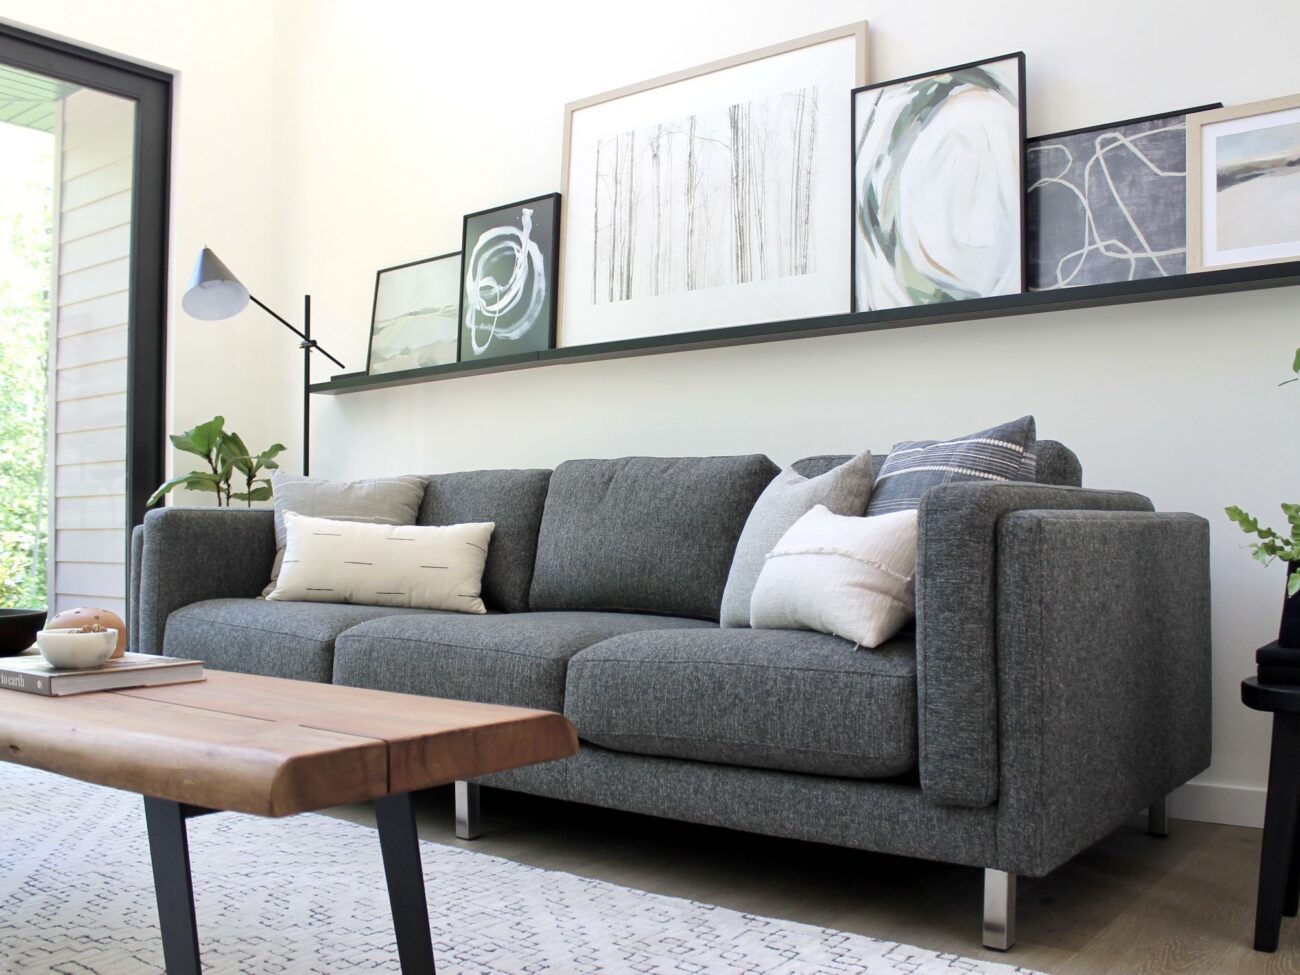 You’ve just purchased a new home, and you’re itching to decorate. How can you choose the perfect sofa?